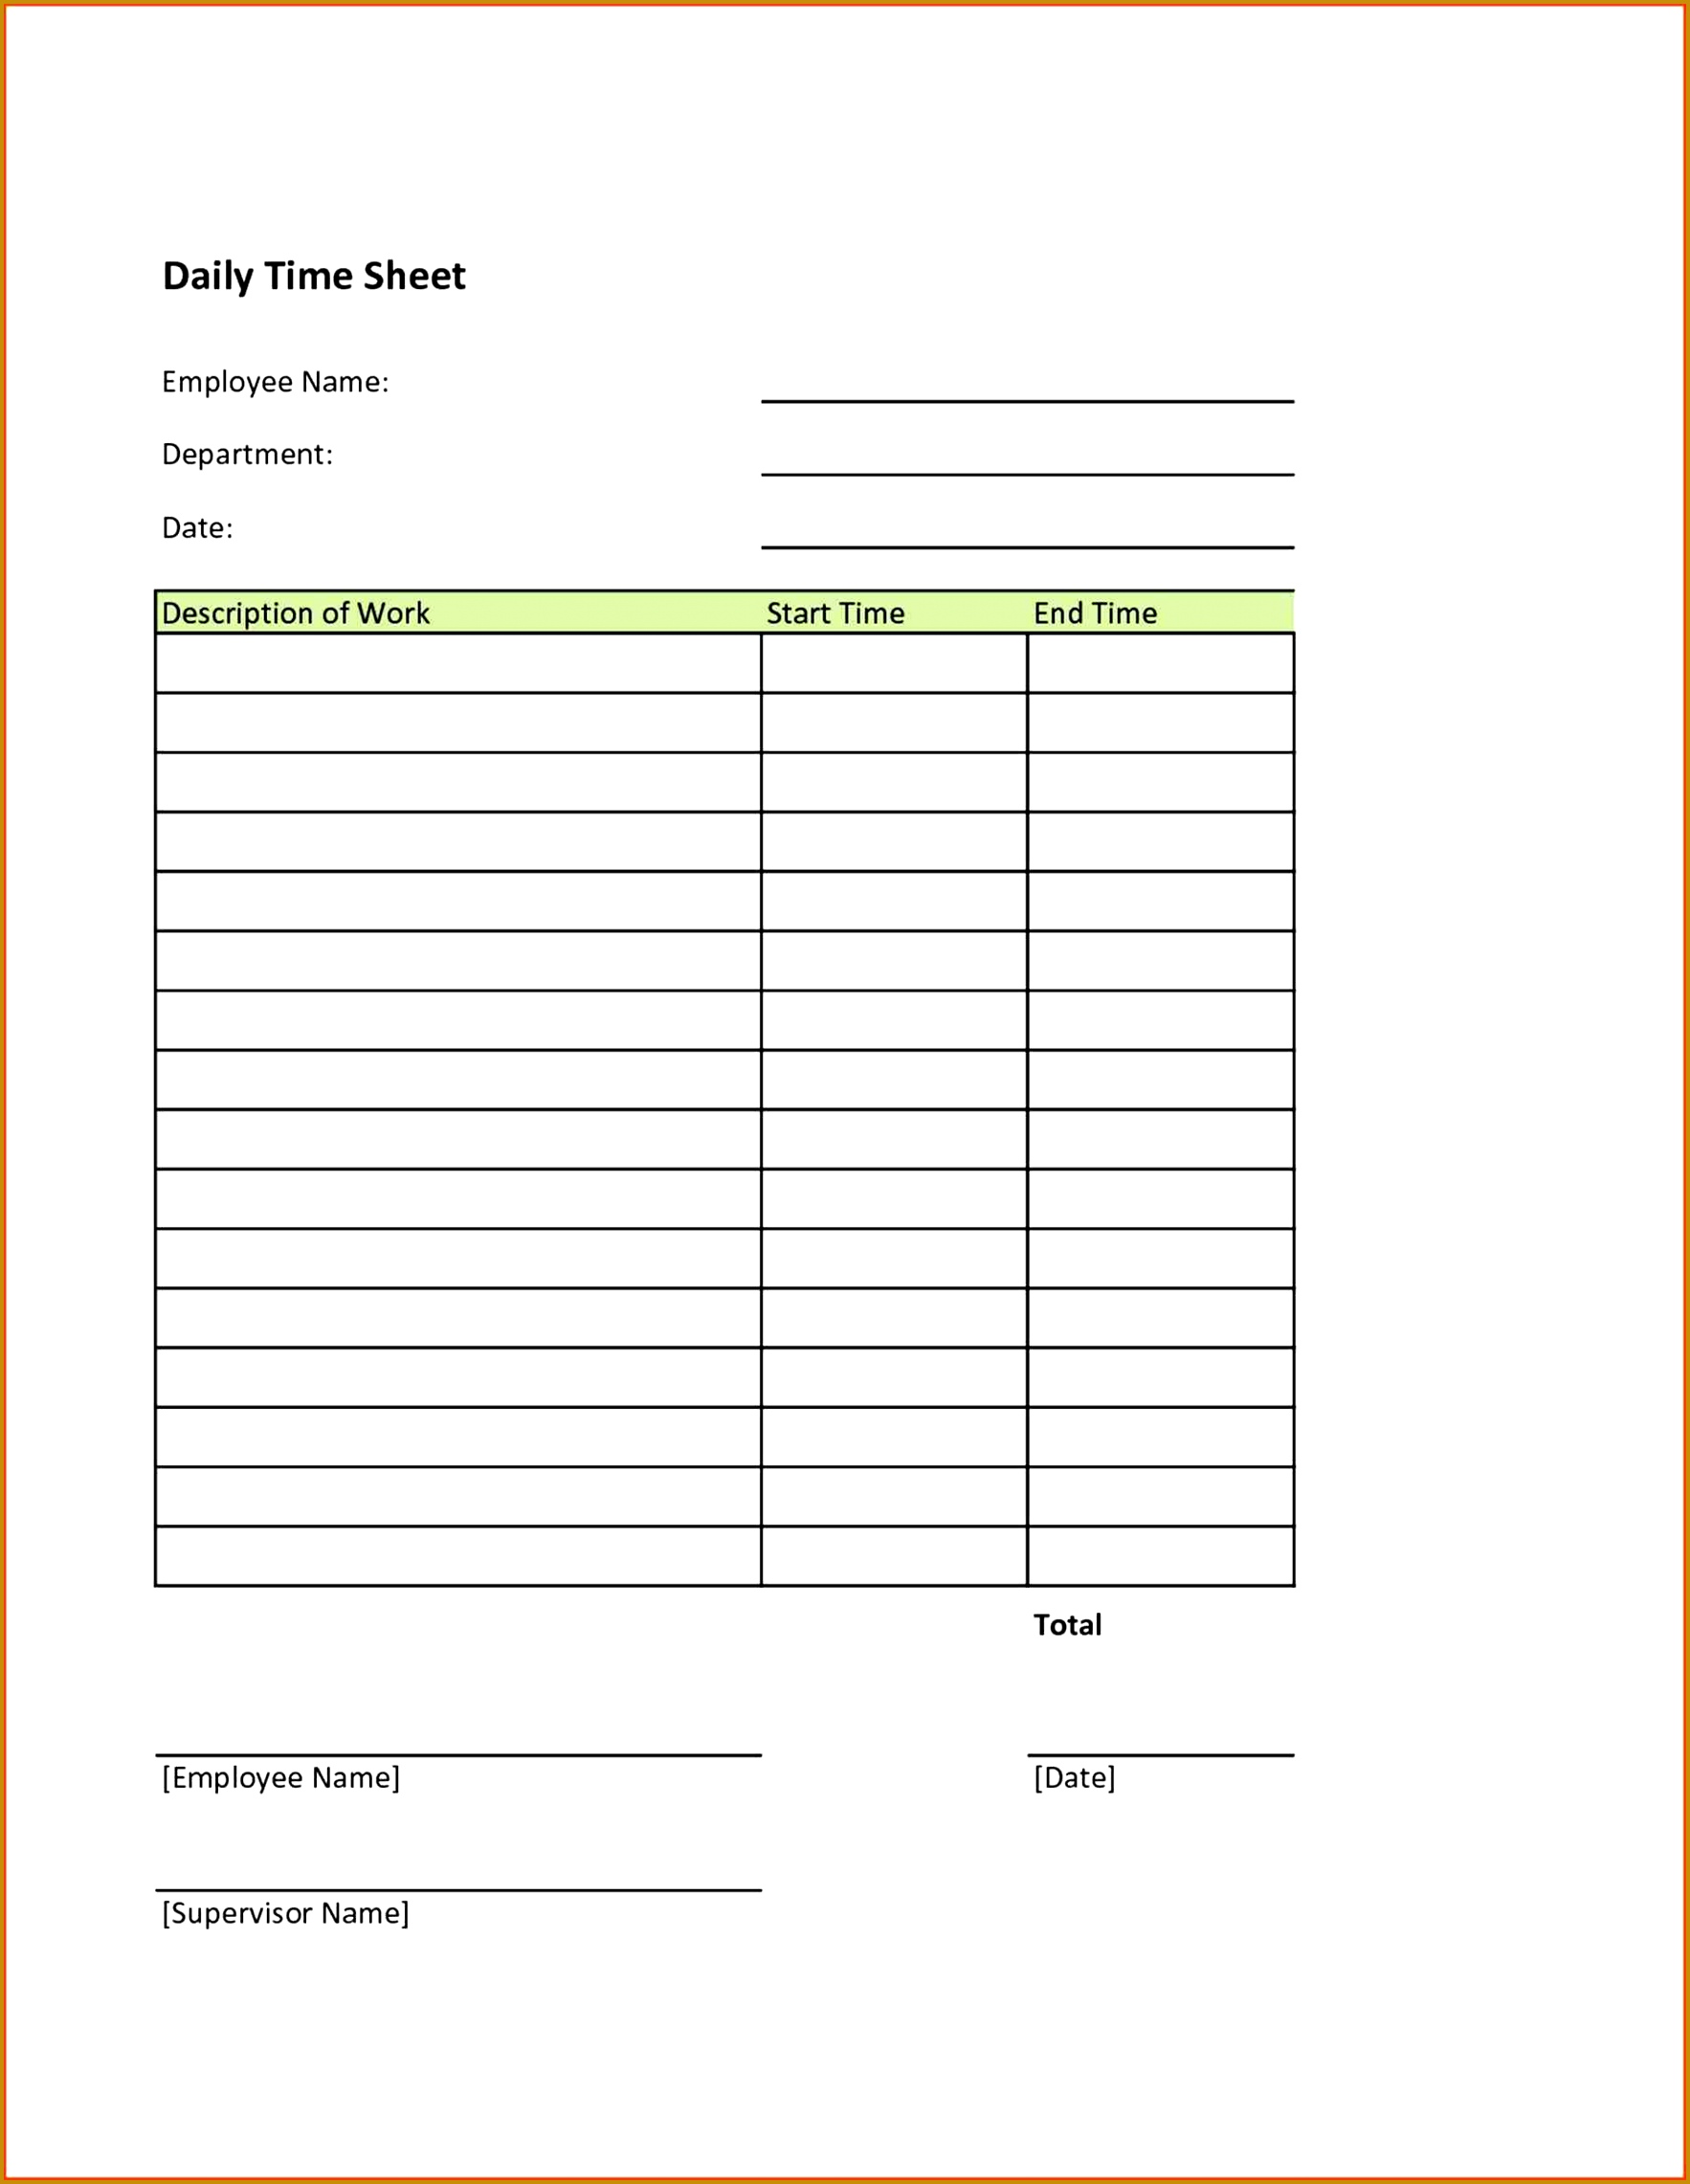 Day Planner Sheet Timesheet Design Lpo Template Word Resume Format Sheet Best Template U Design Blank Printable Time Sheets Free Weekly Time Sheet 22821766